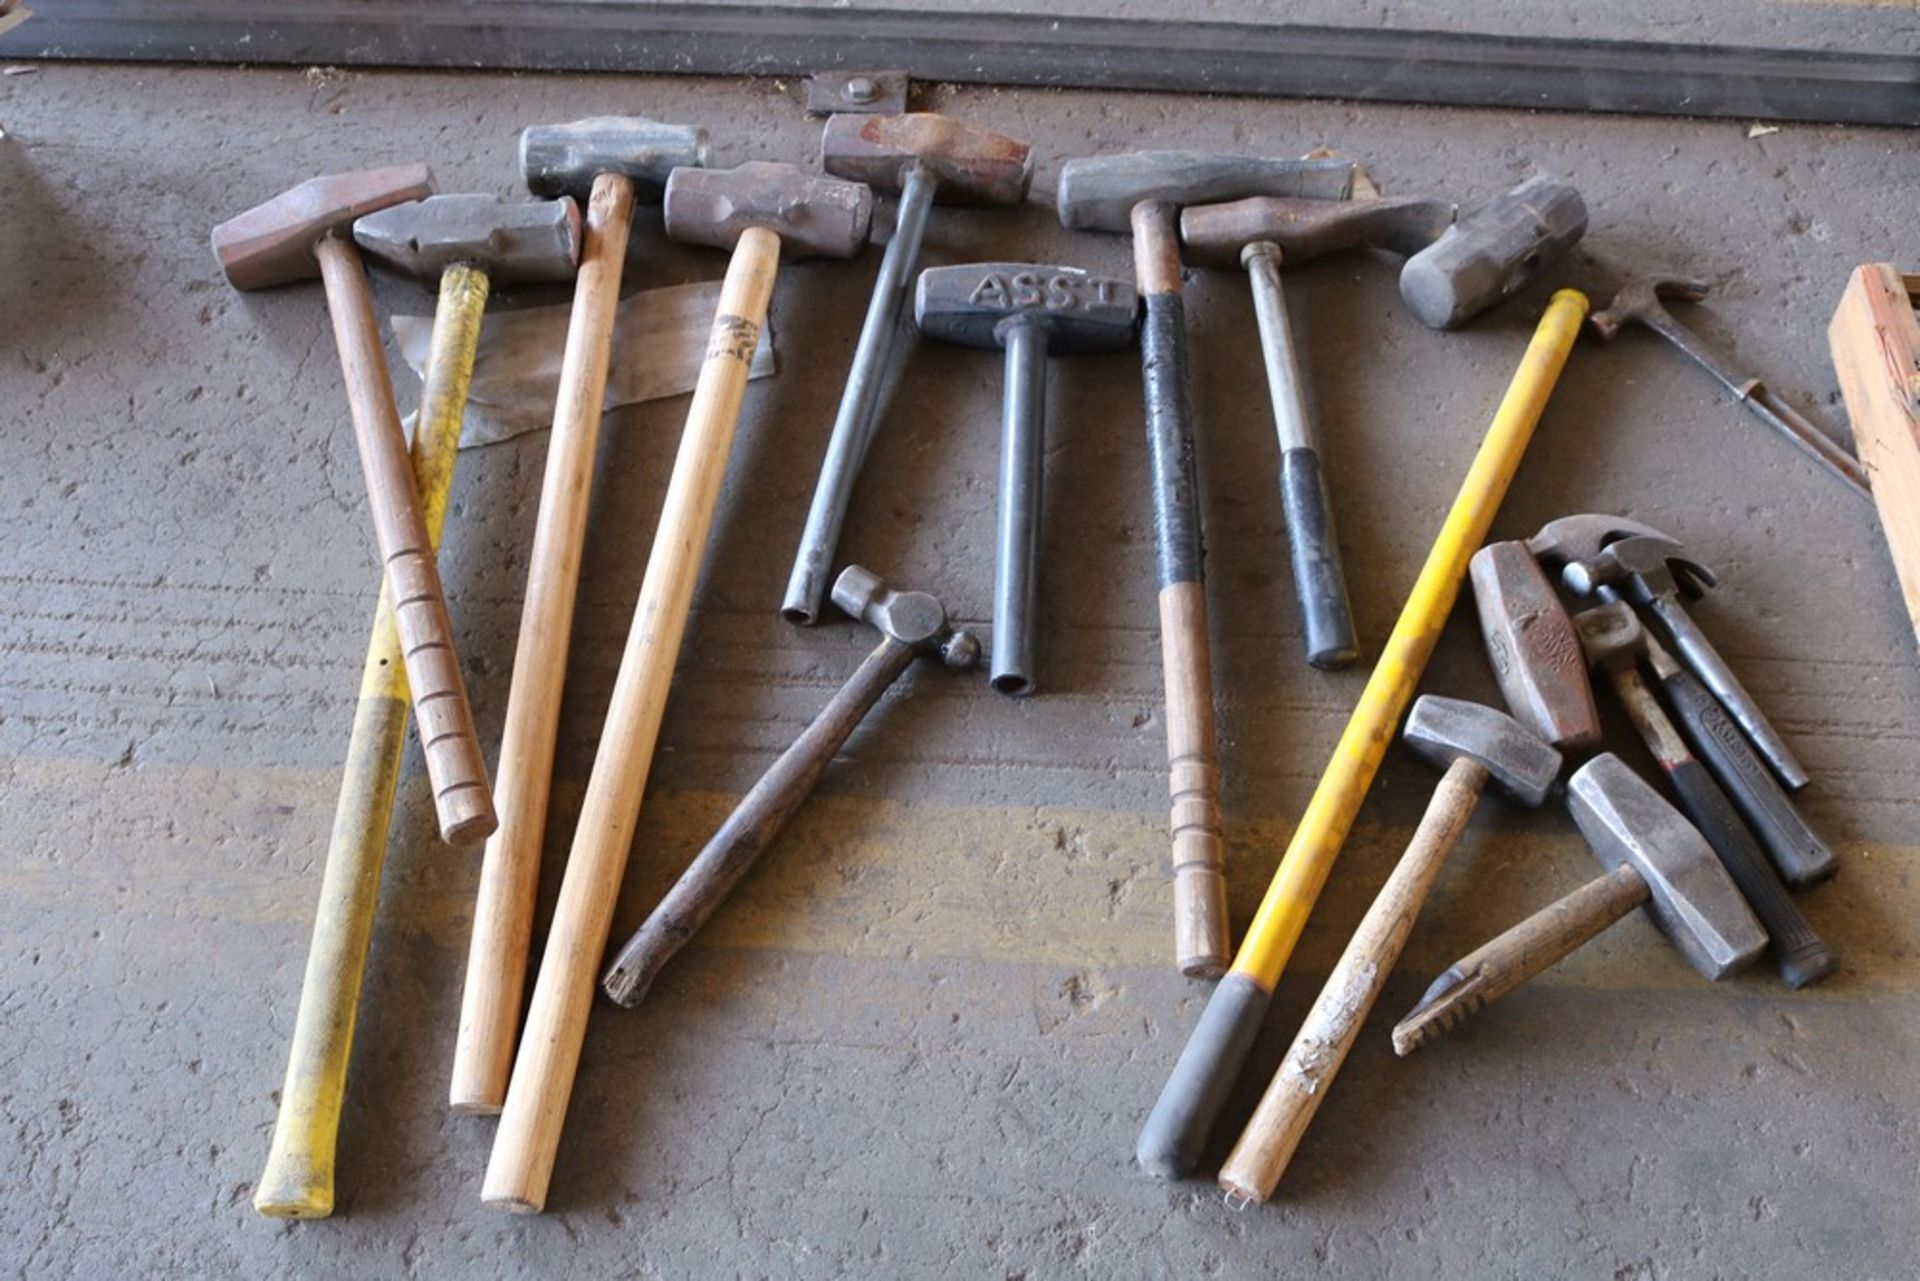 sledge hammers plus misc hammers